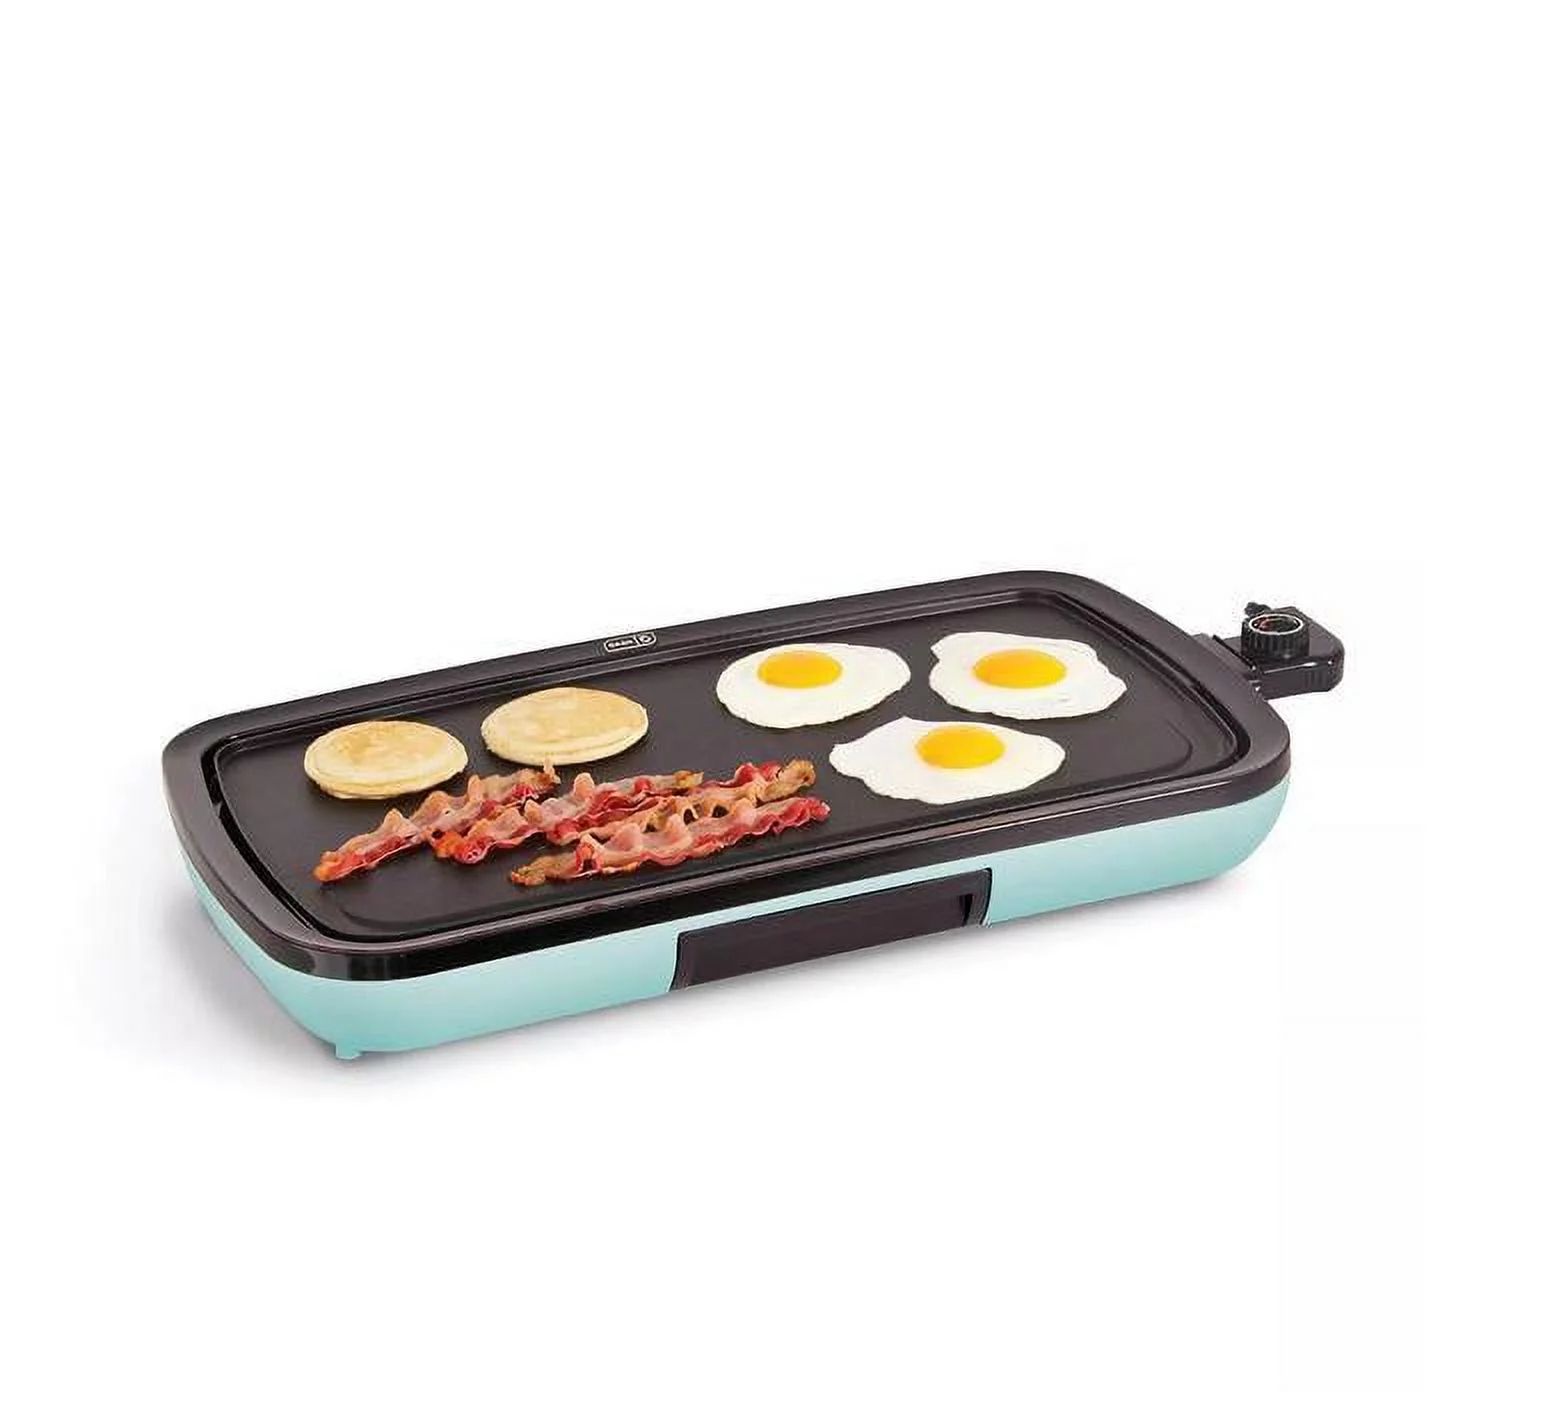 Dash Everyday Nonstick Electric Griddle for Pancakes Burgers, Quesadillas, Eggs & Other on the Go... | Walmart (US)